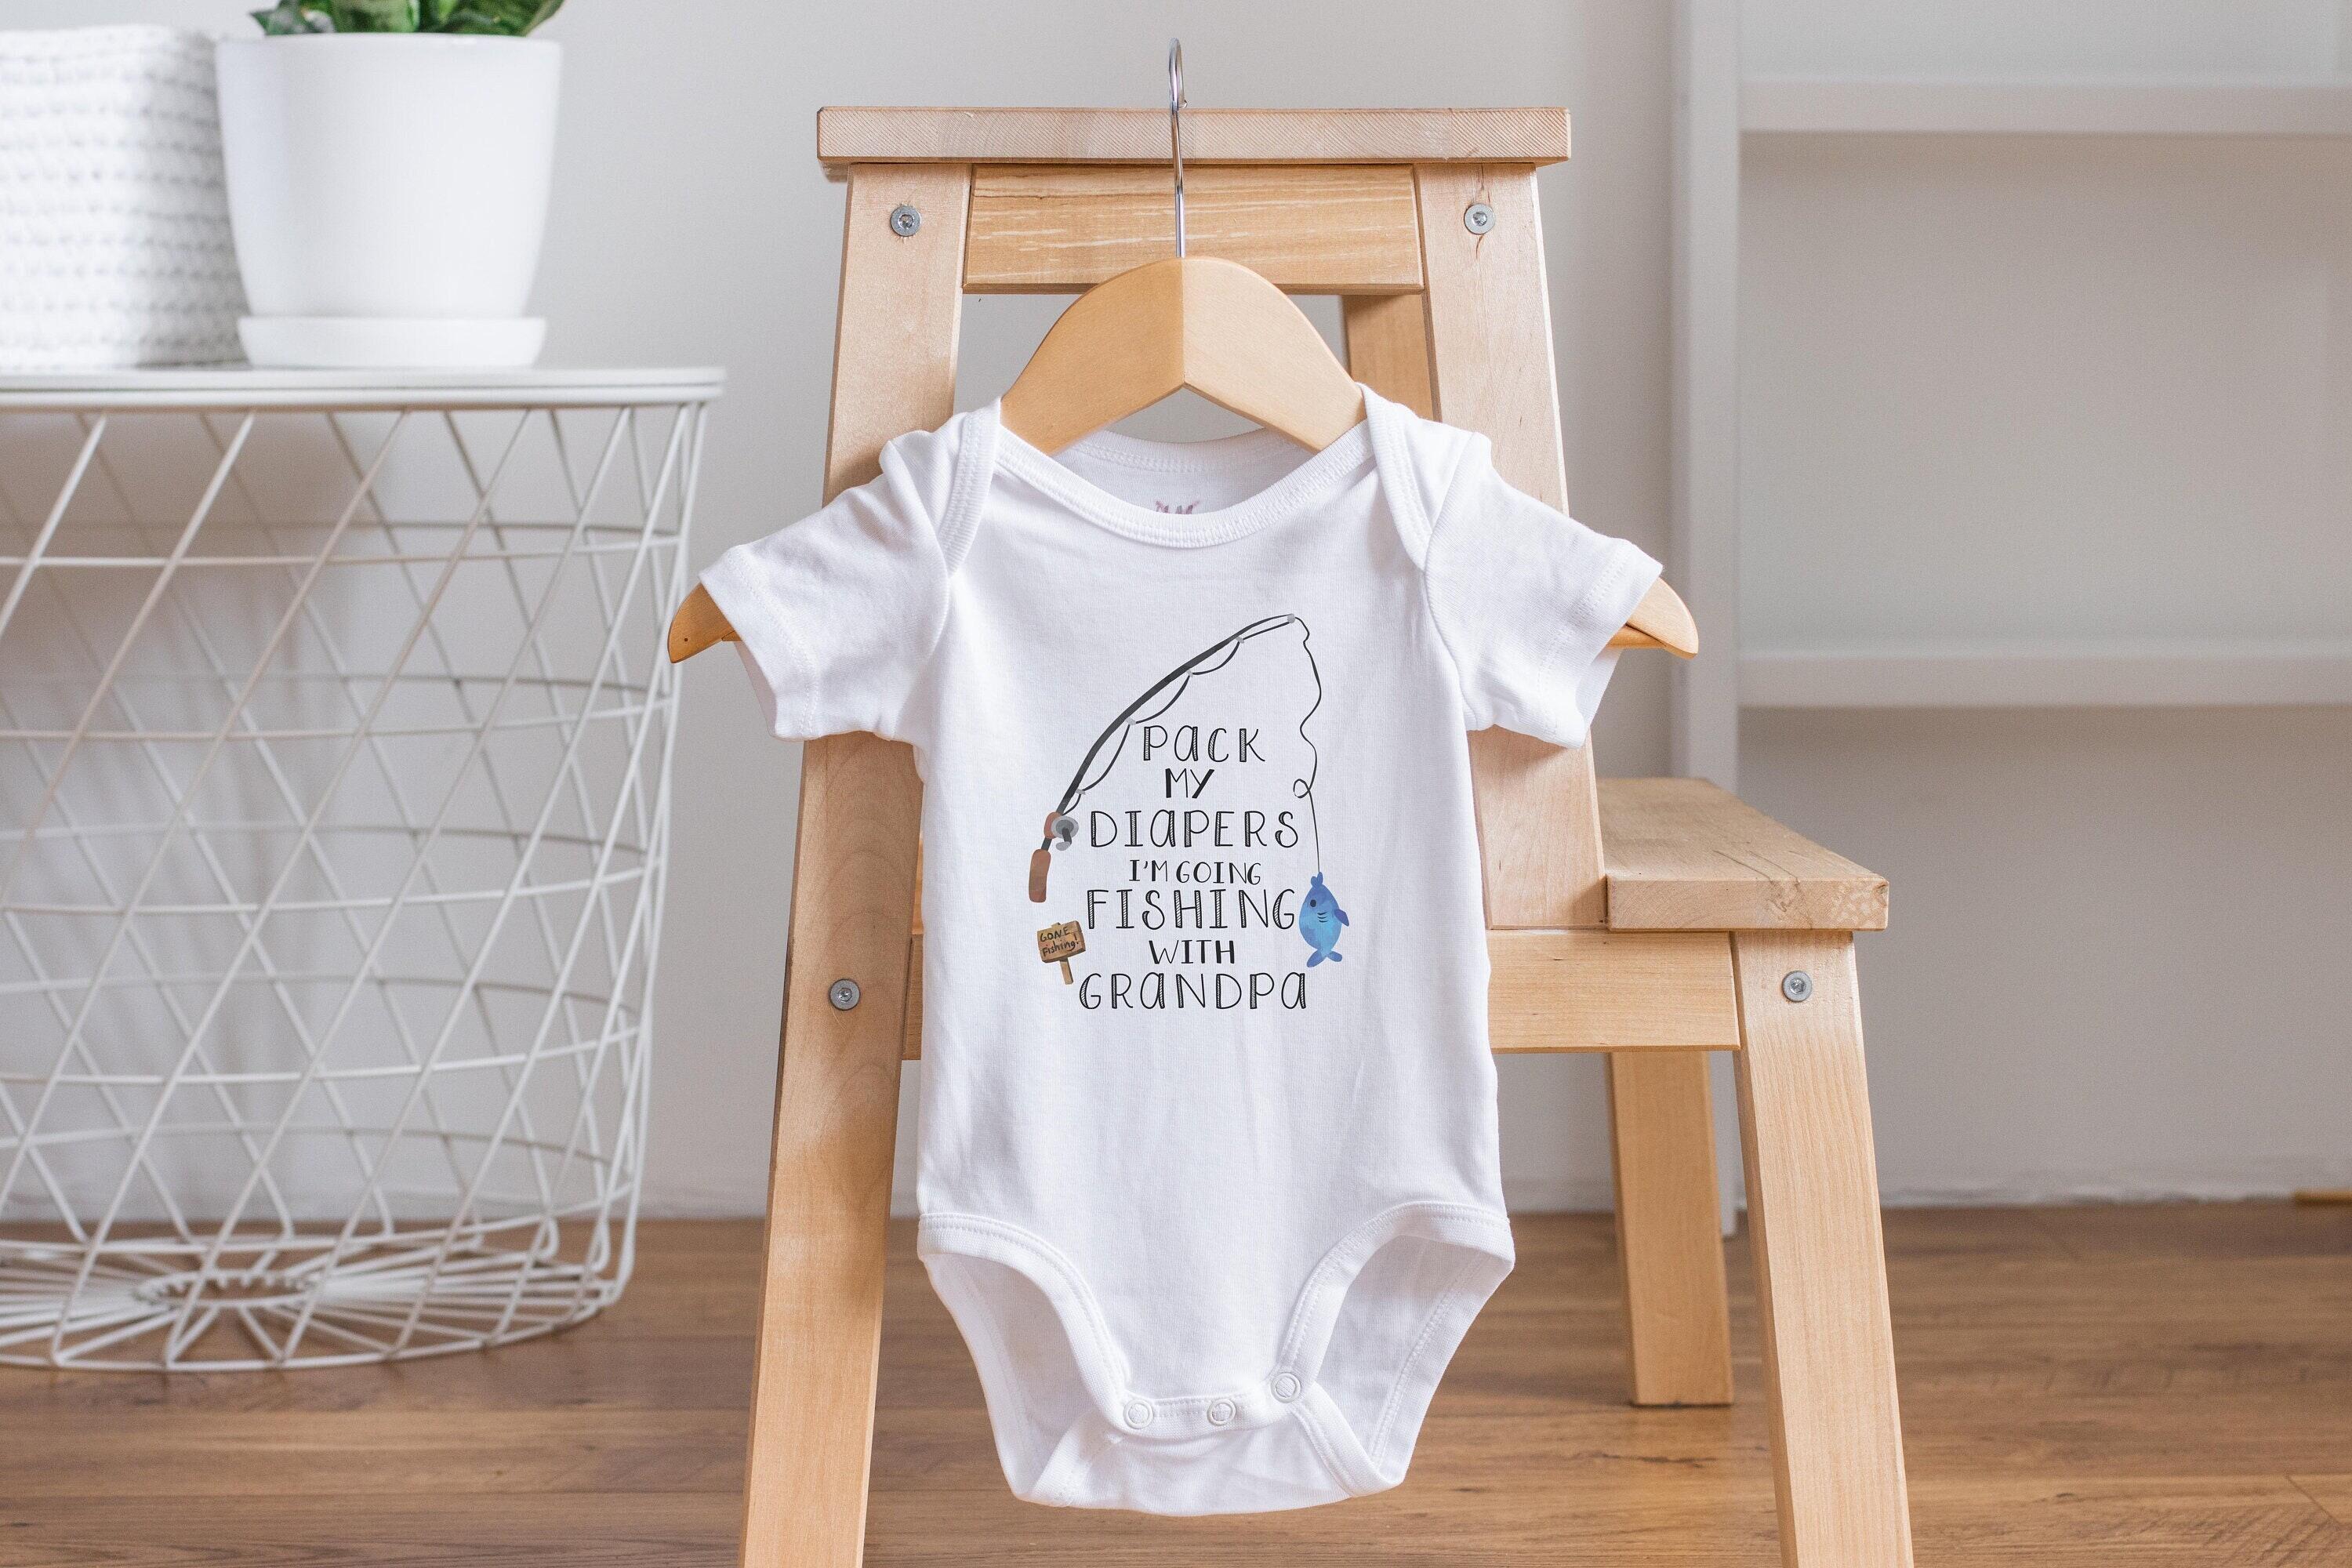 Clothing & Accessories :: Kids & Baby :: Baby Clothing :: Grandpa's Fishing  Buddy, Grandpa Onesie®, Grandpa's Favorite, Baby Shower Gift, Fishing  Onesie®, Fishing Baby Clothes, Pregnancy Reveal